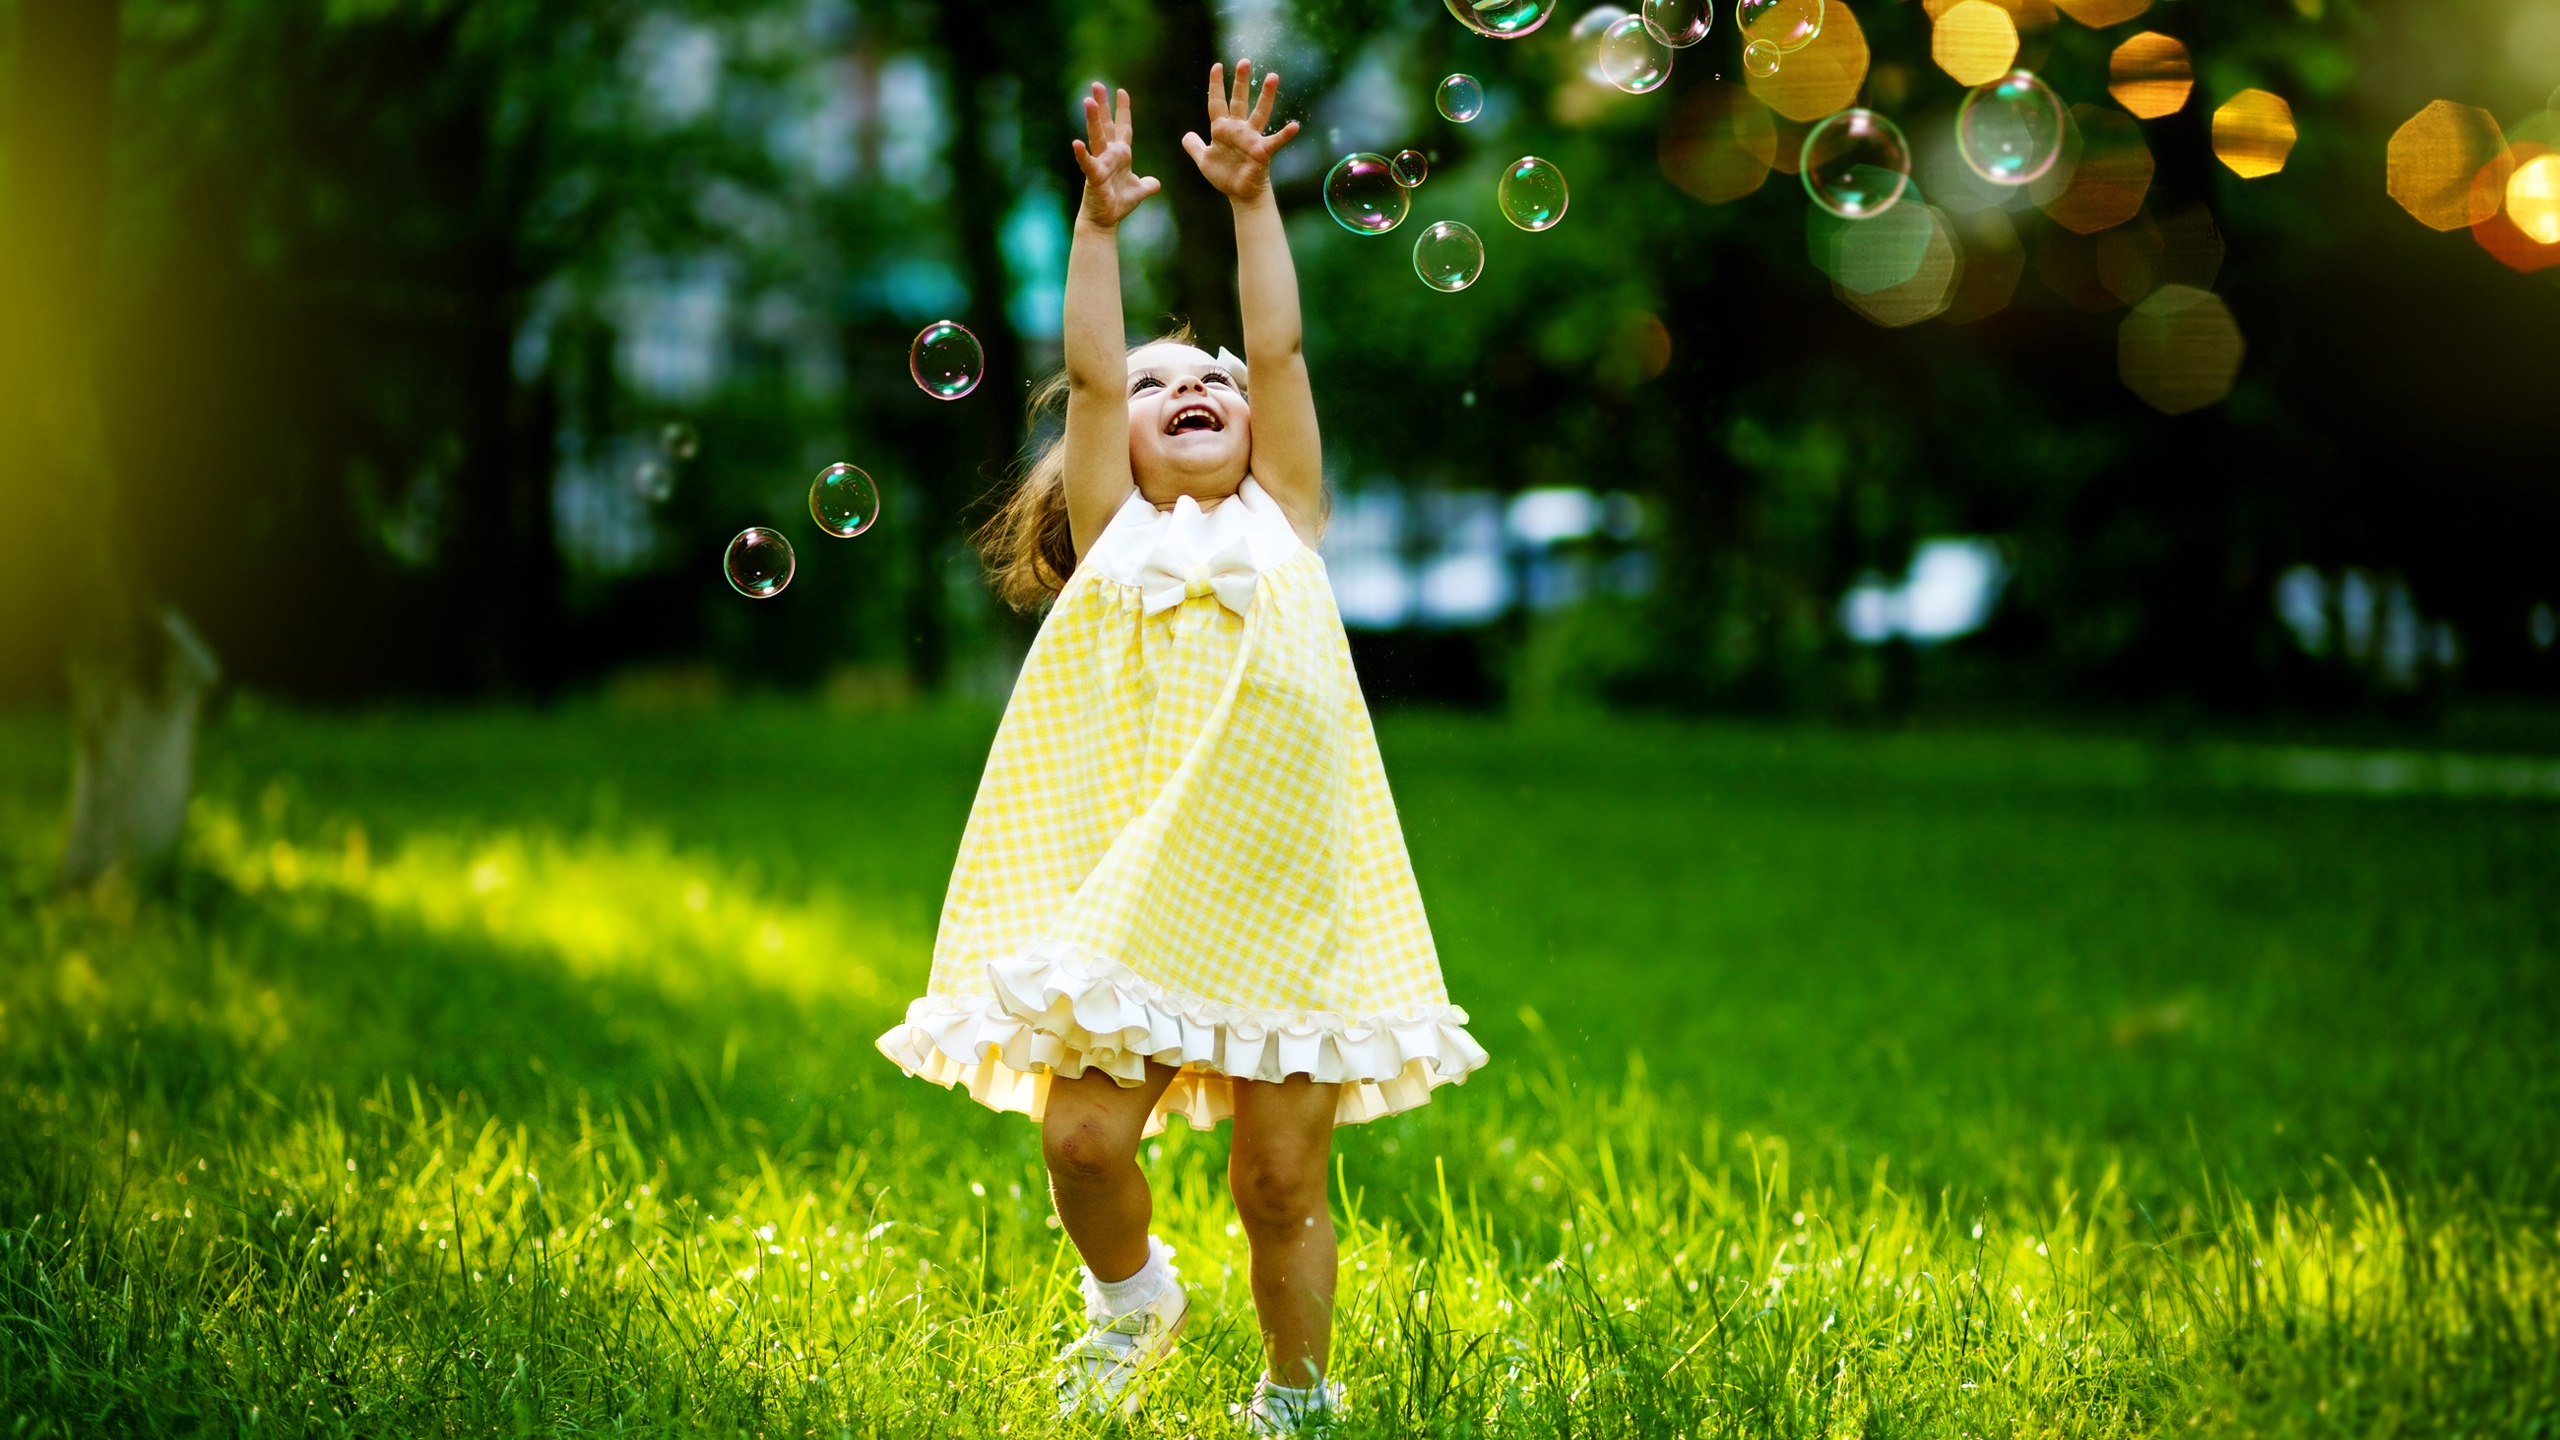 Little Girl Playing with Bubbles for 2560x1440 HDTV resolution